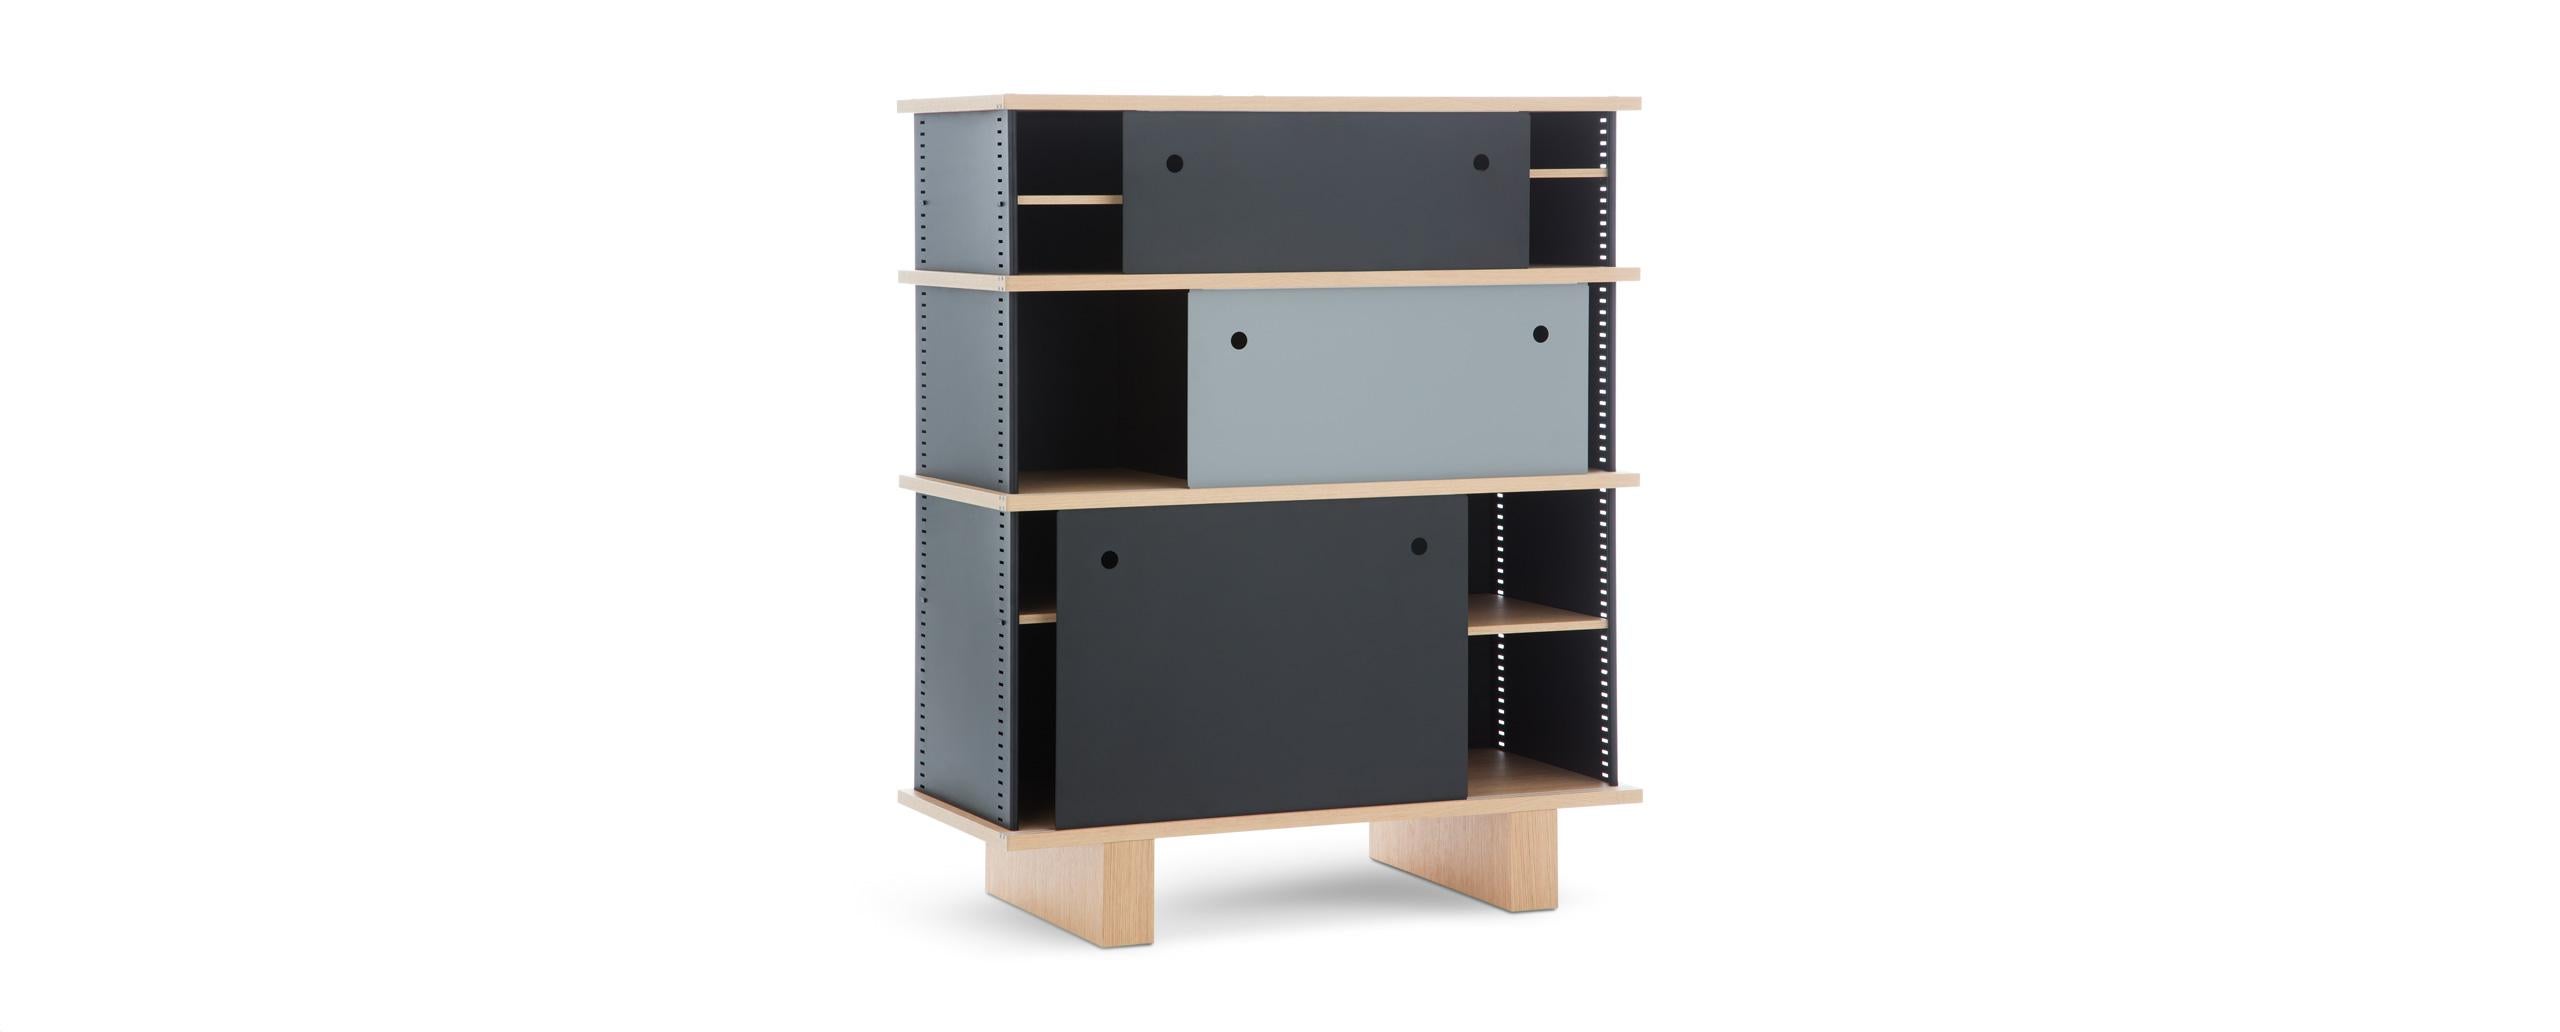 Shelving unit designed by Charlotte Perriand in 1952-56. Relaunched by Cassina in 2012.
Manufactured by Cassina in Italy.

Authenticity and avant-garde characterise Charlotte Perriand’s Nuage shelving unit from 1940. Drawing on her experience of